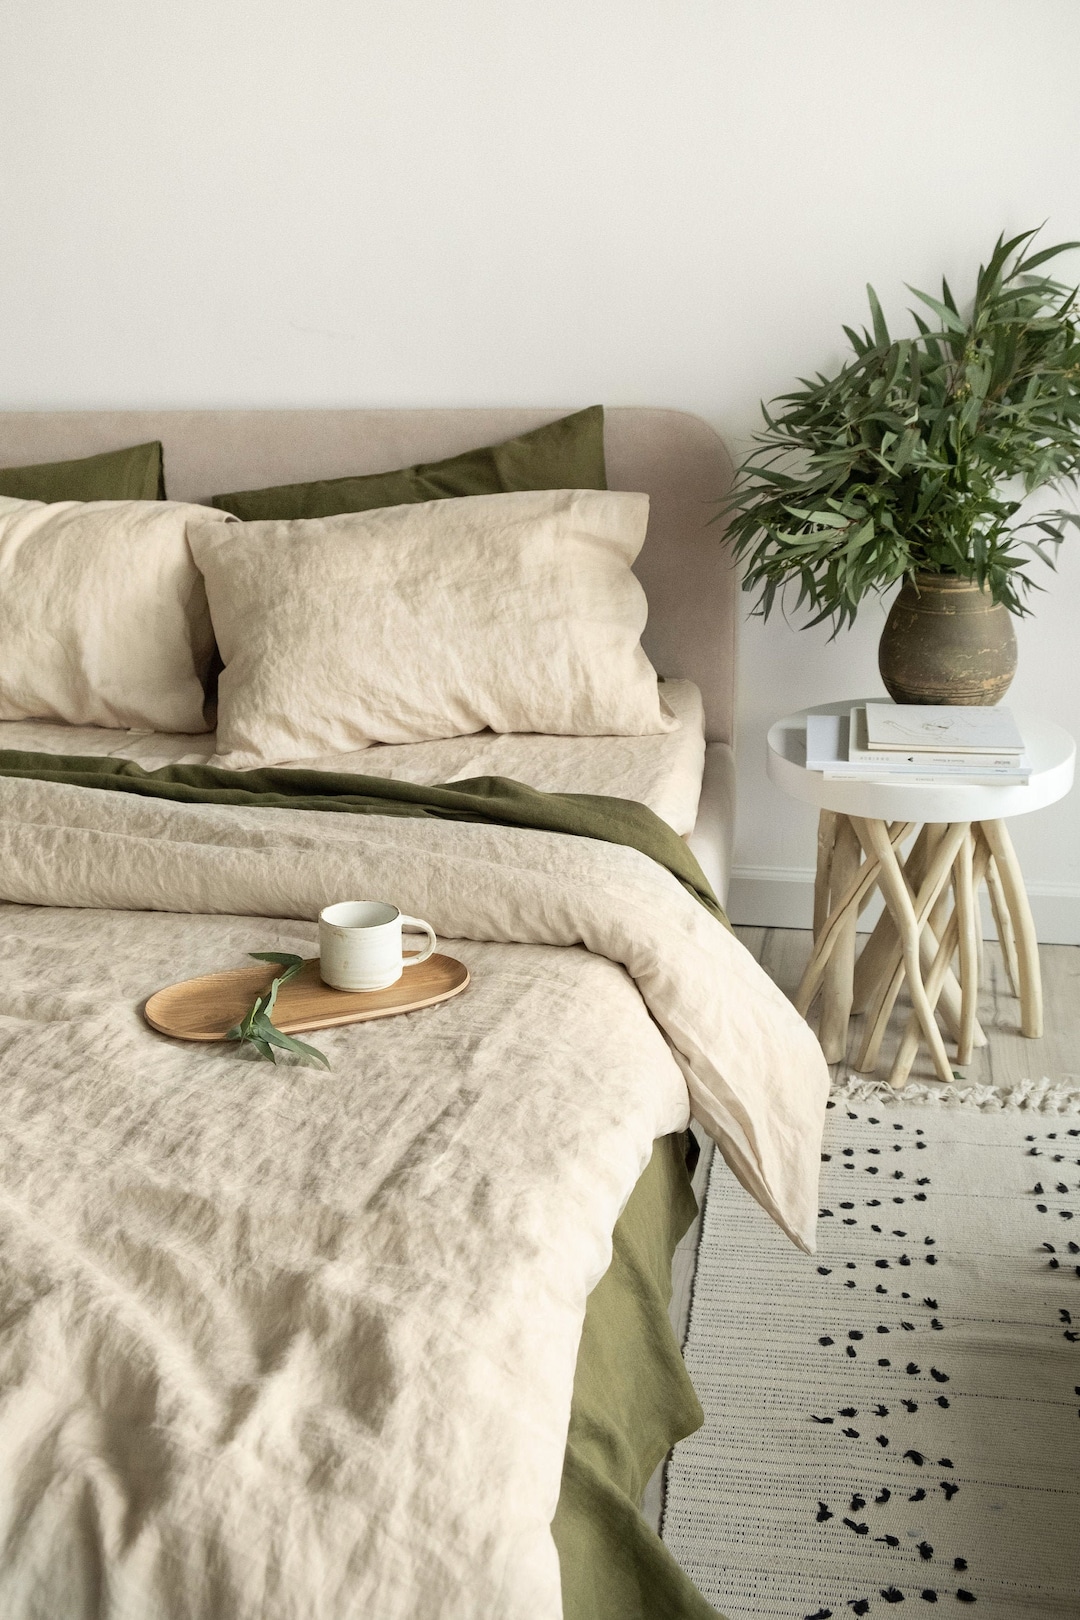 The Linen Life: The Health Benefits of Linen Clothing and Sheets